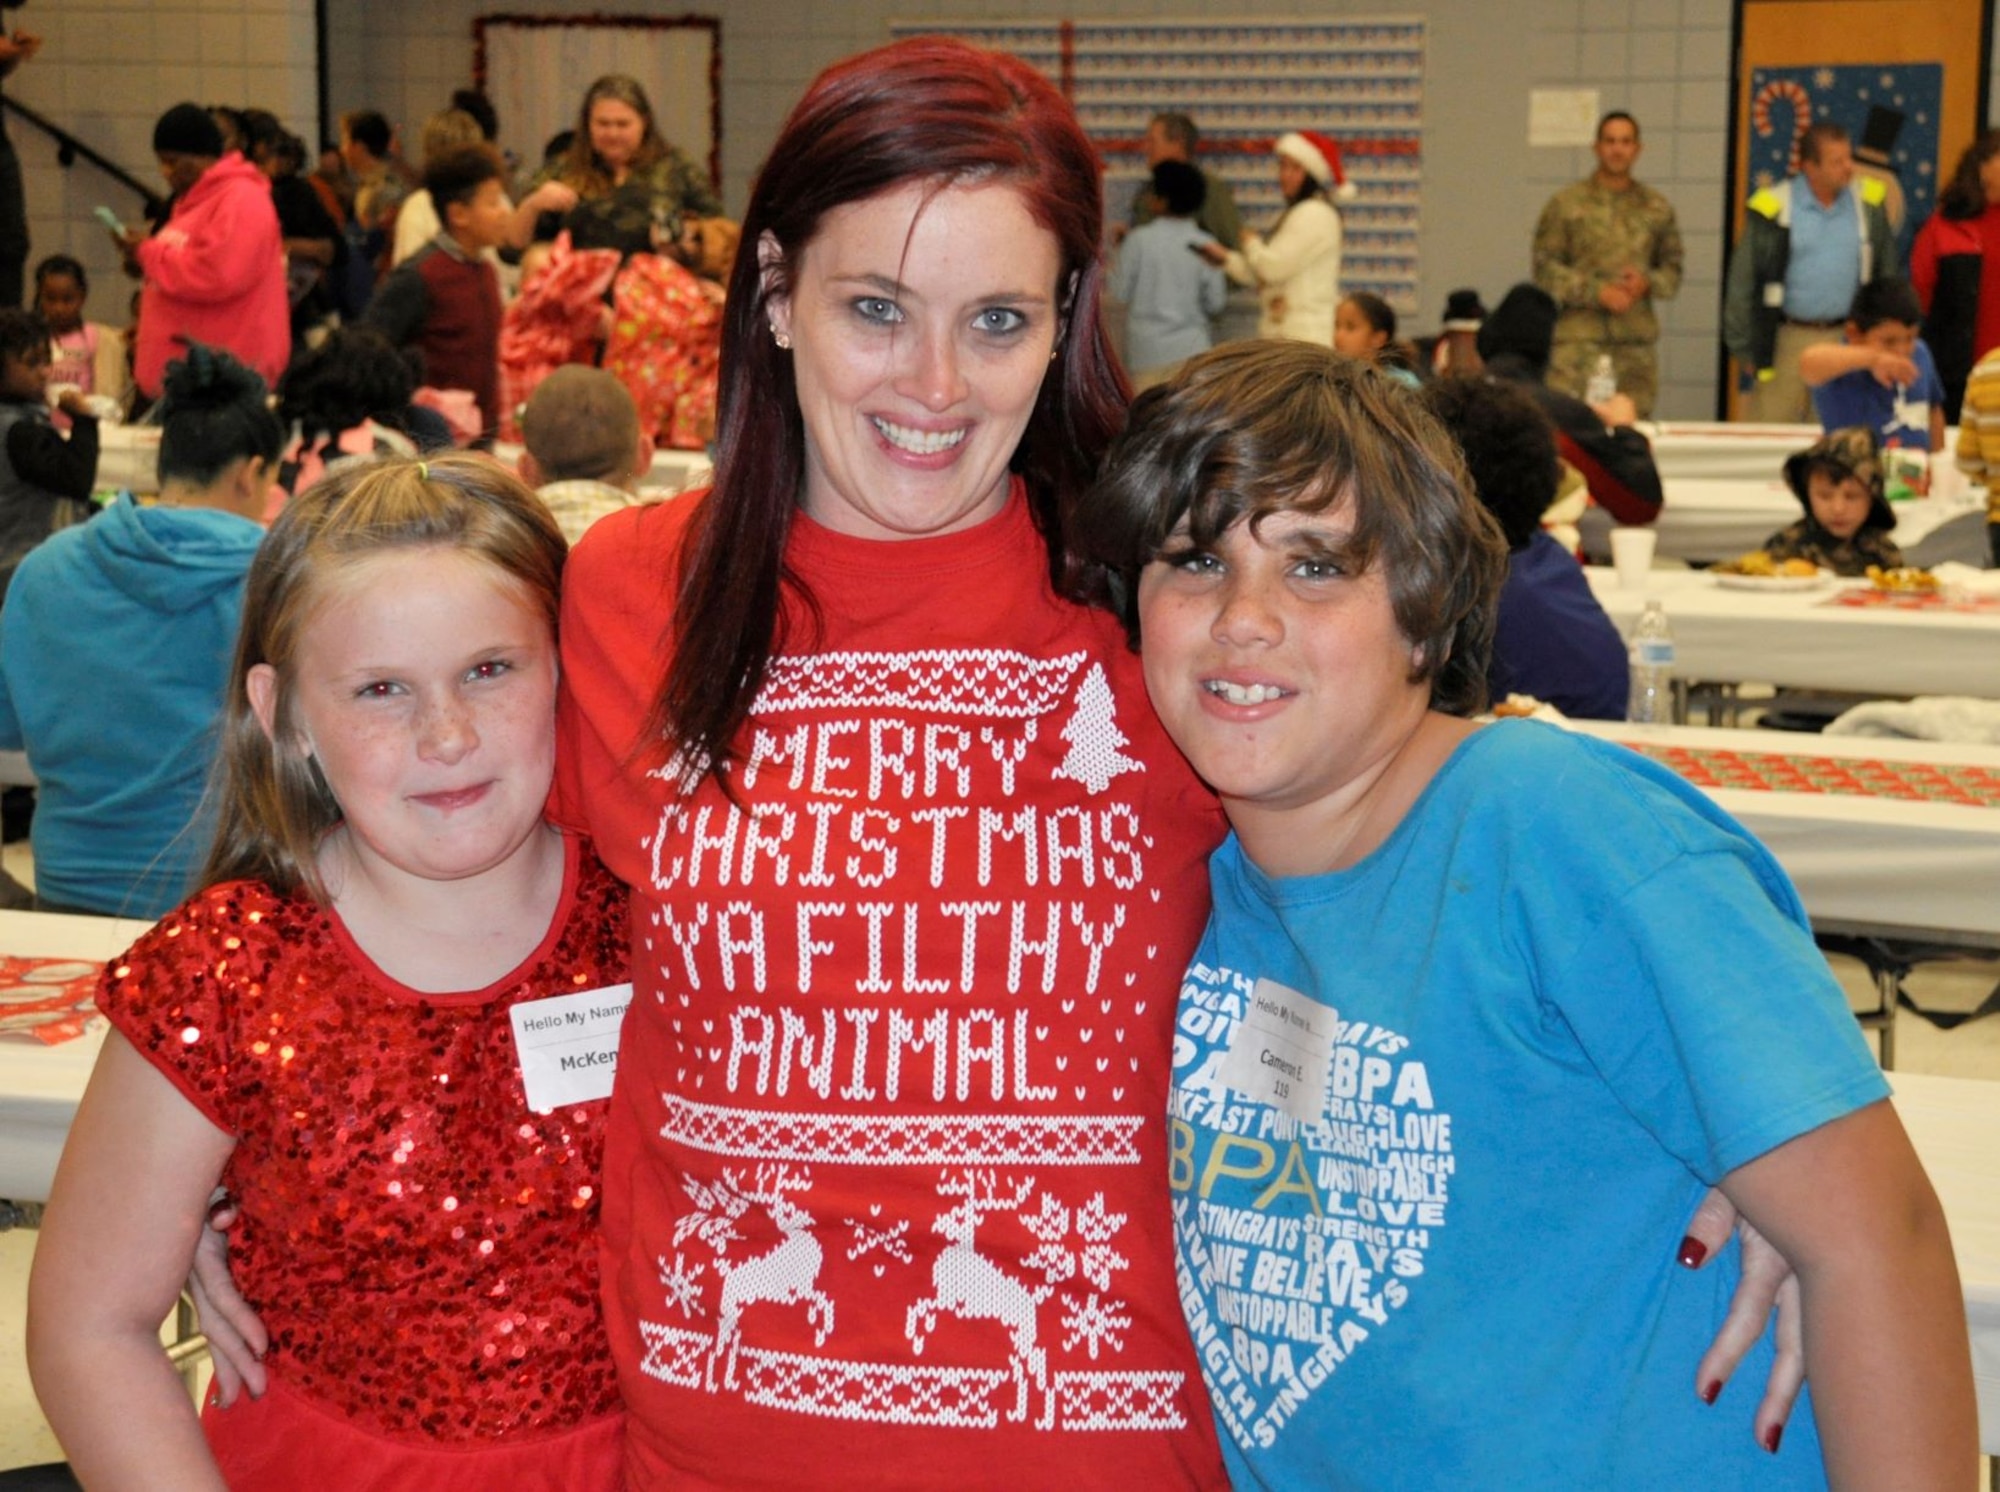 Tiffany Eldridge and her two children were all smiles Dec. 19 at the annual “Spread the Joy” event sponsored by the Air Force Civil Engineer Center Emergency Management team from Tyndall Air Force Base, Fla.